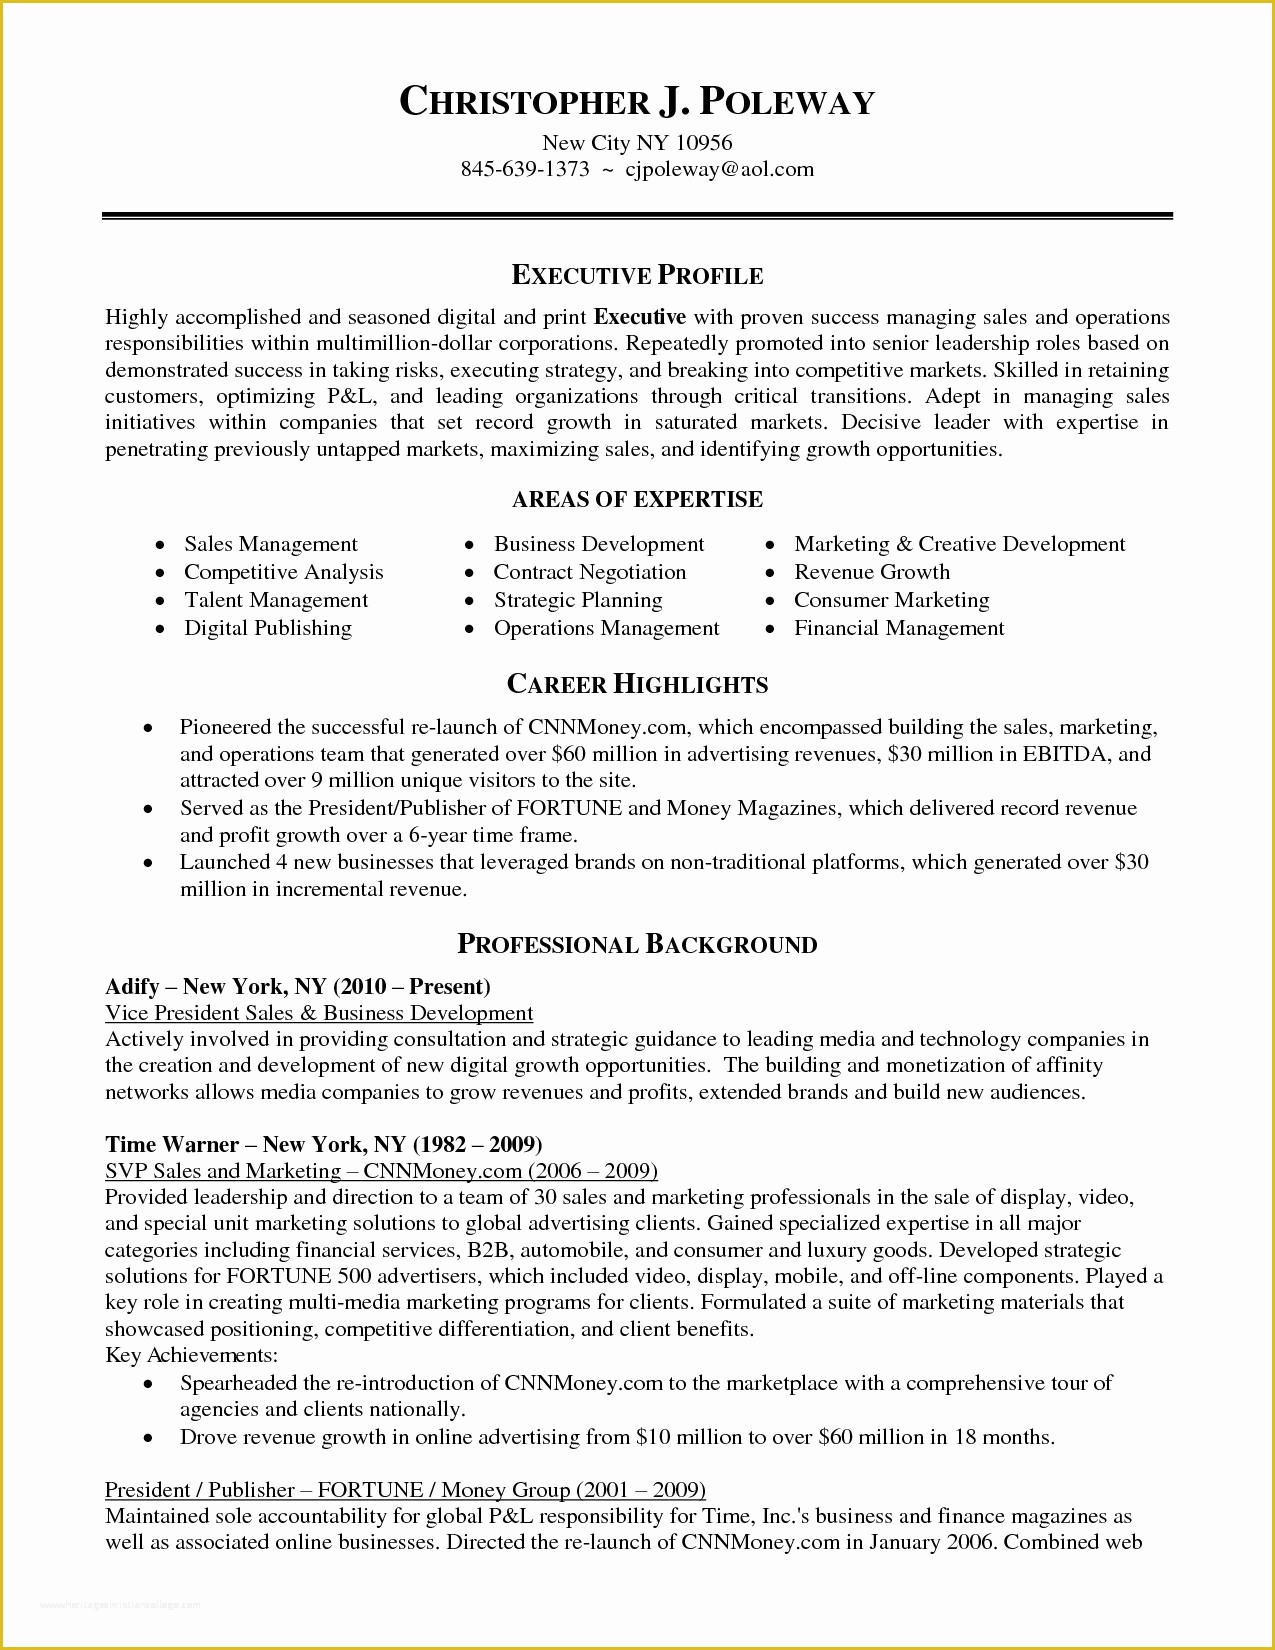 Resume Templates that are Actually Free Of Printing Services Resume Sample Bongdaao